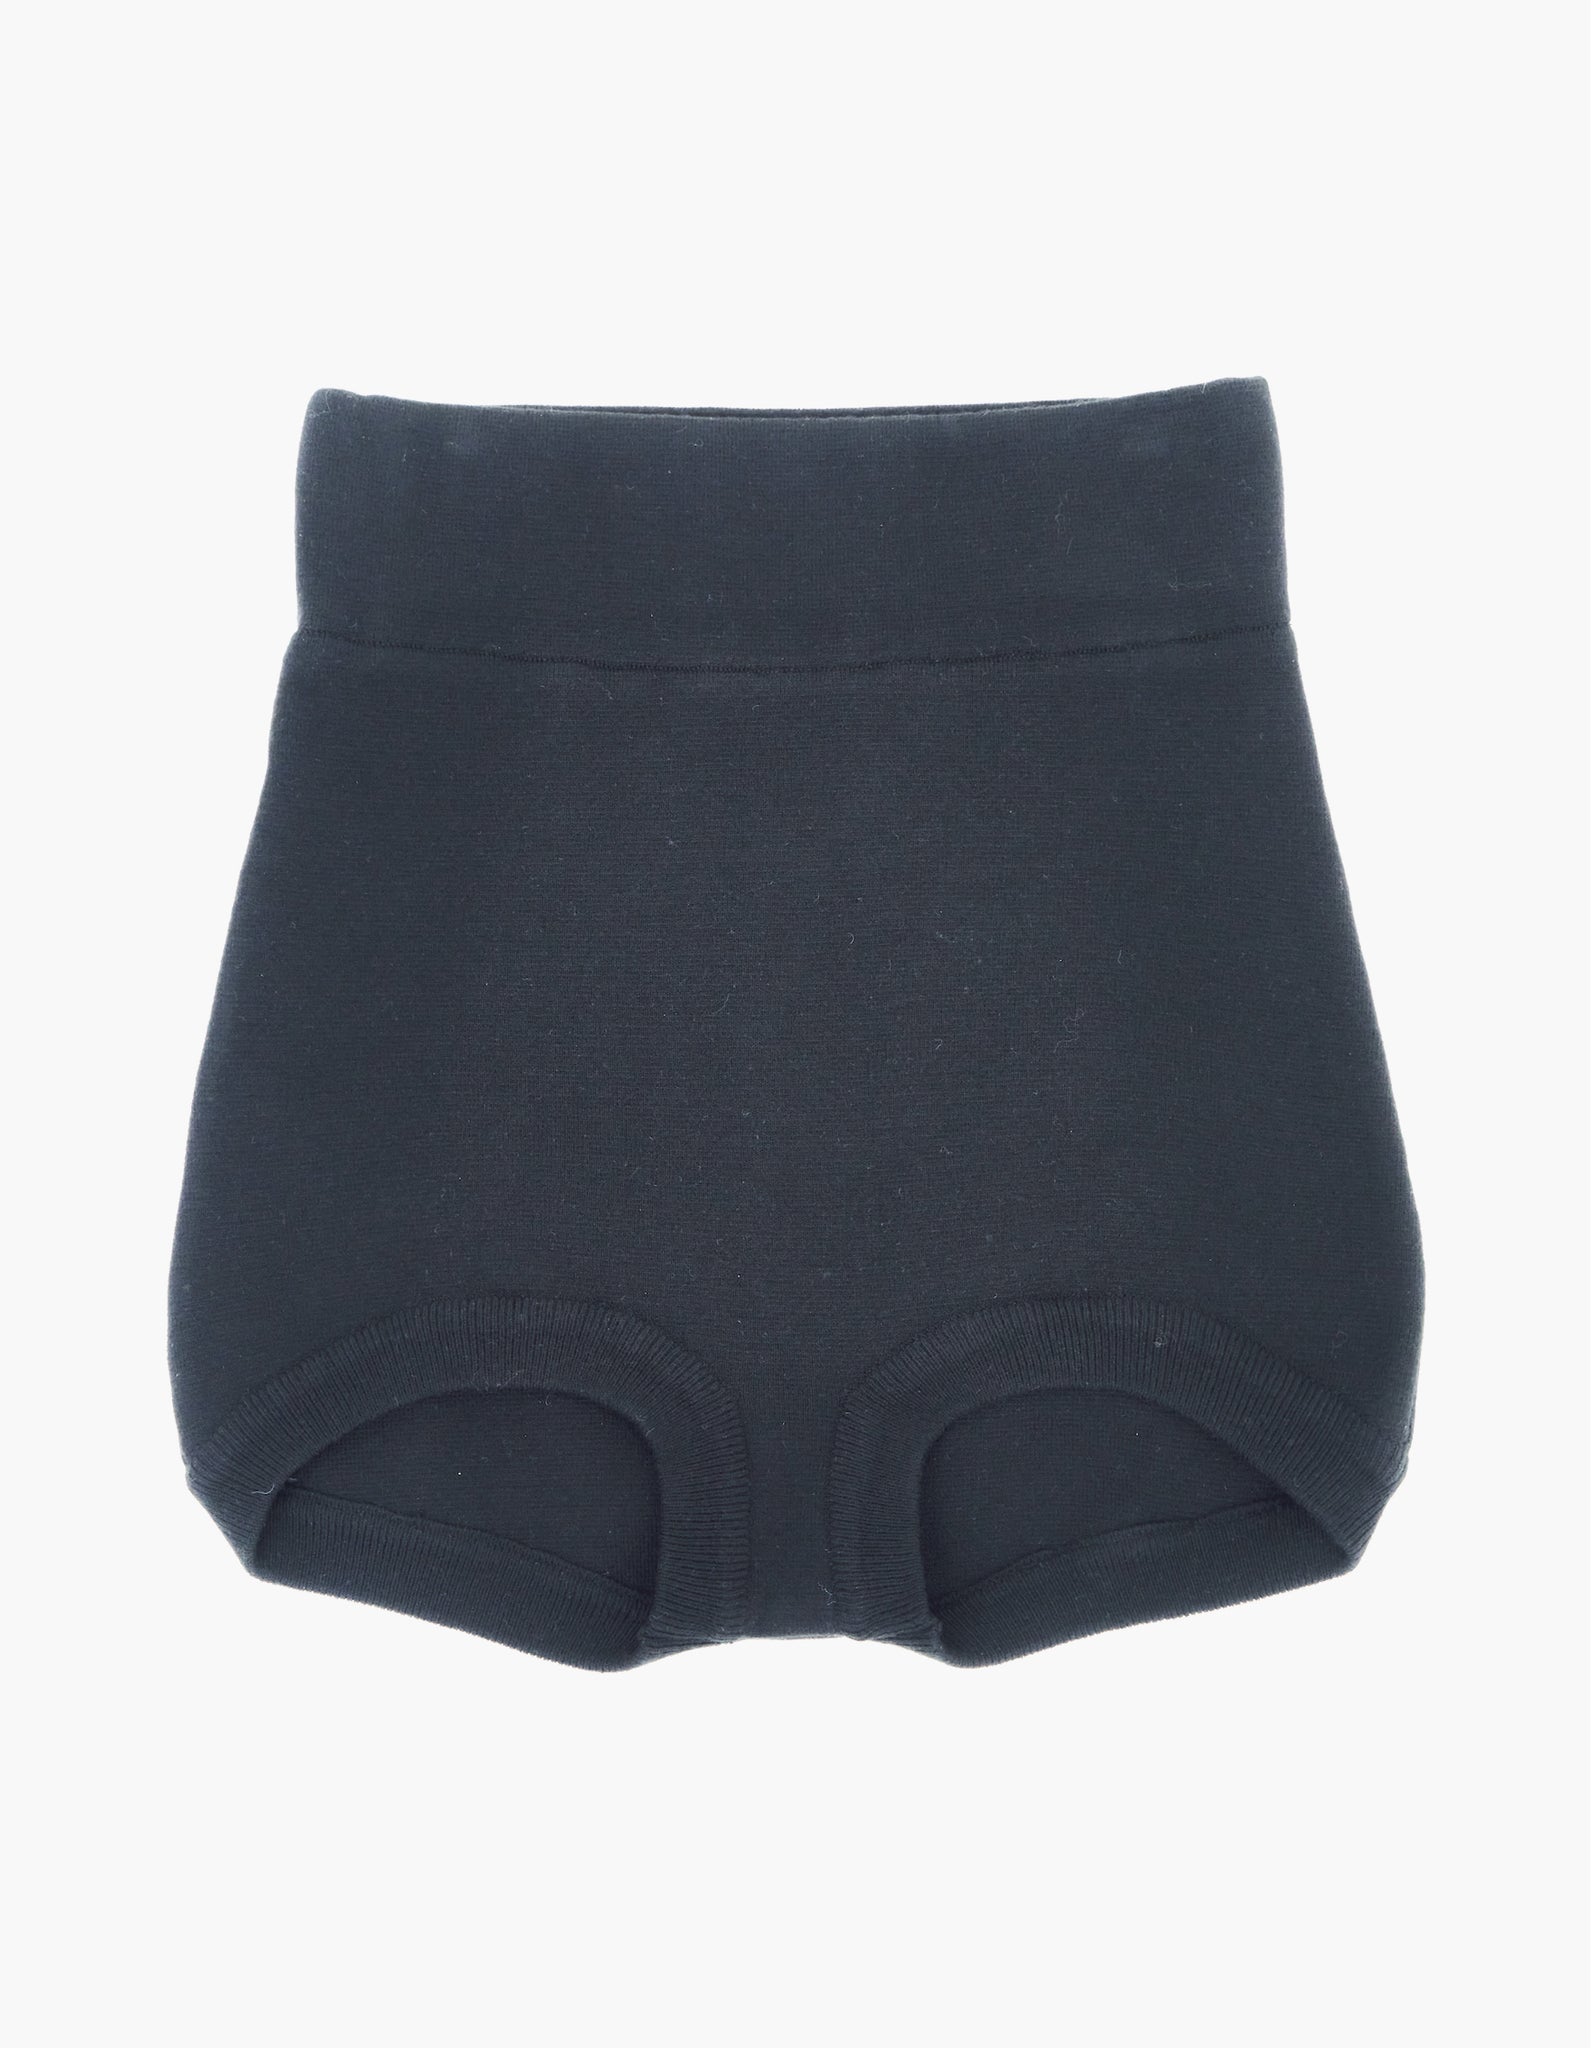 STACEY KNIT BLOOMERS